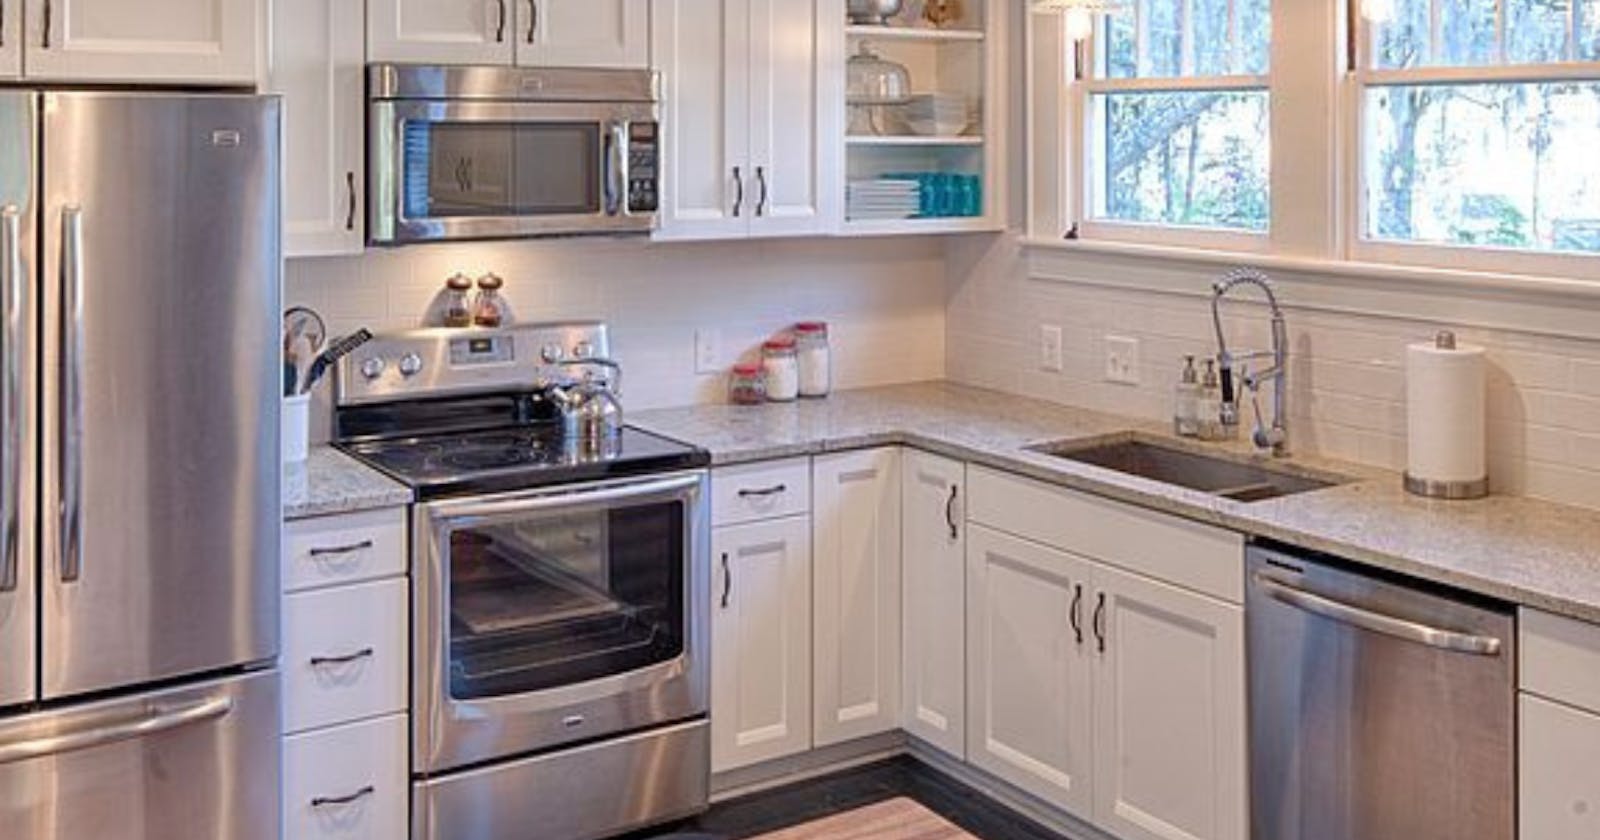 6 Reasons Why You Should Add CCC Cabinetry To Your Kitchen Plan